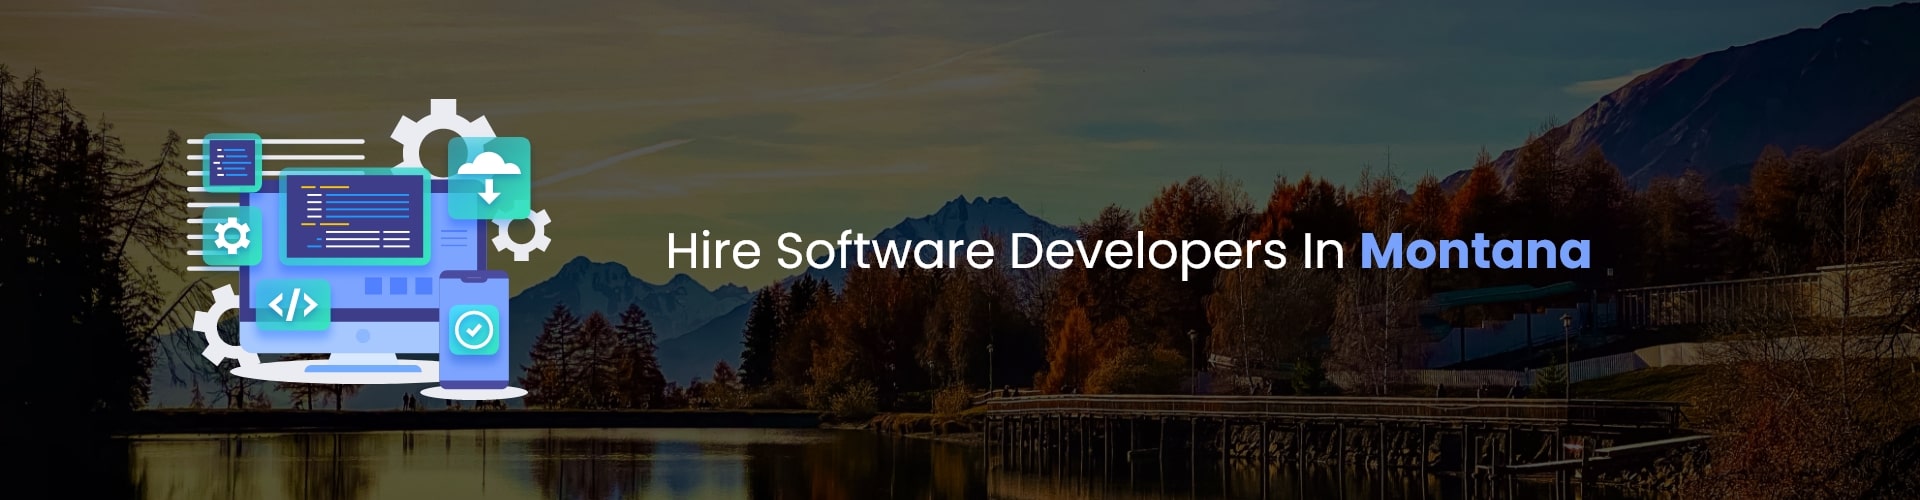 hire software developers in montana